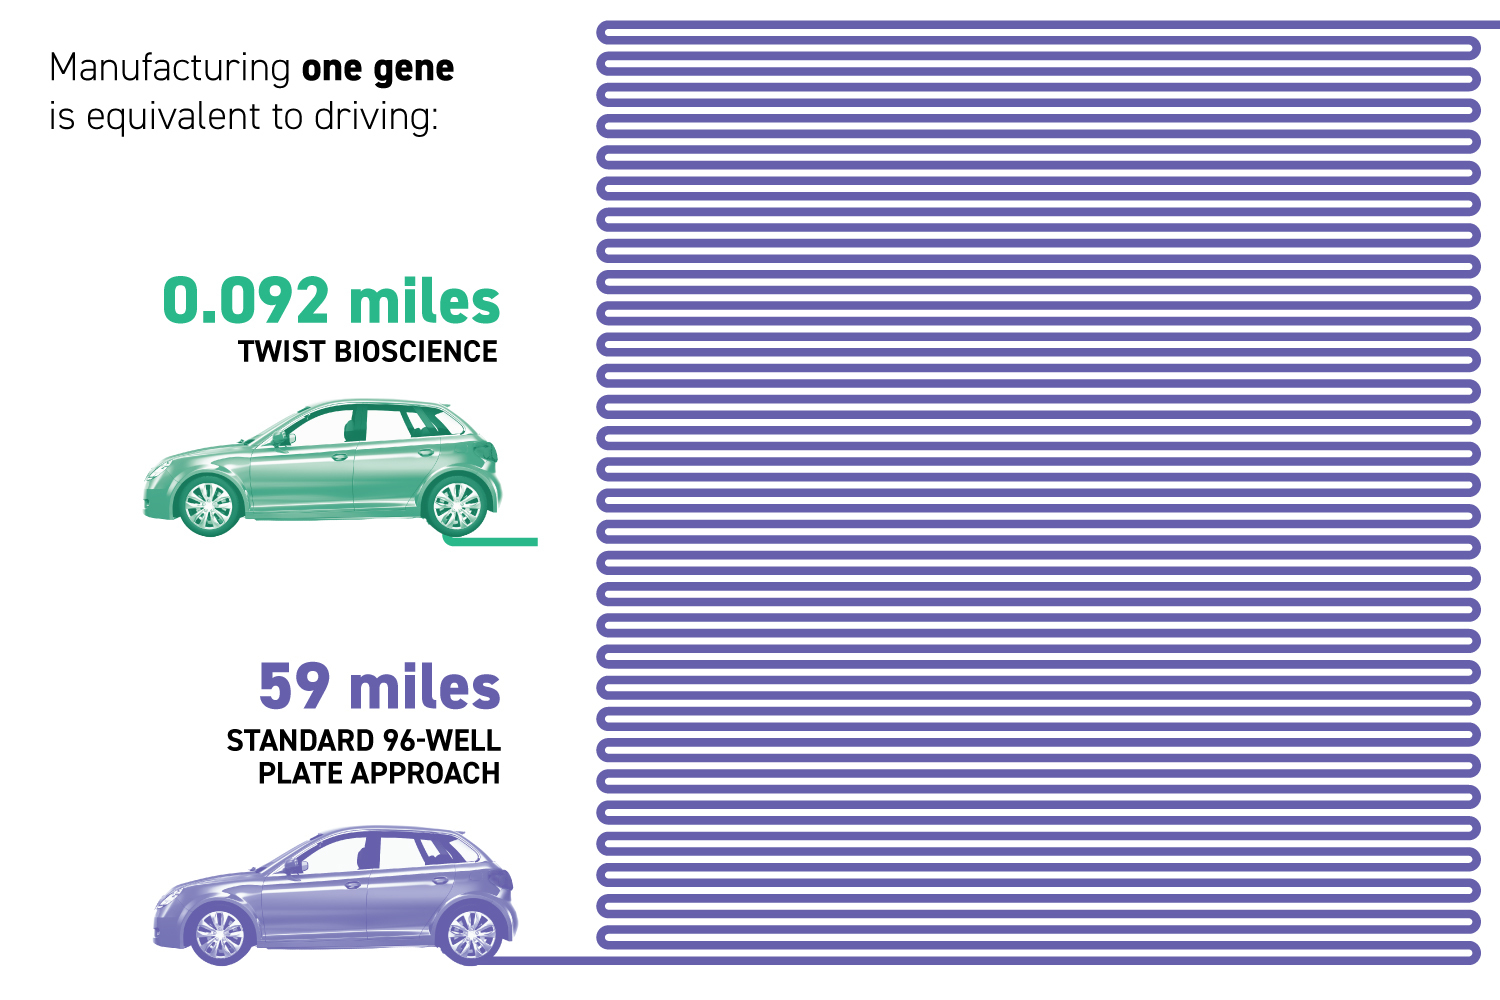 Infographic showing milage difference between technologies with a green car (representing Twist) and purple car. Text reads: Manufacturing one gene is equivalent to driving: 0,092 miles with Twist Bioscience; 59 miles with standard 96-well plate approach.